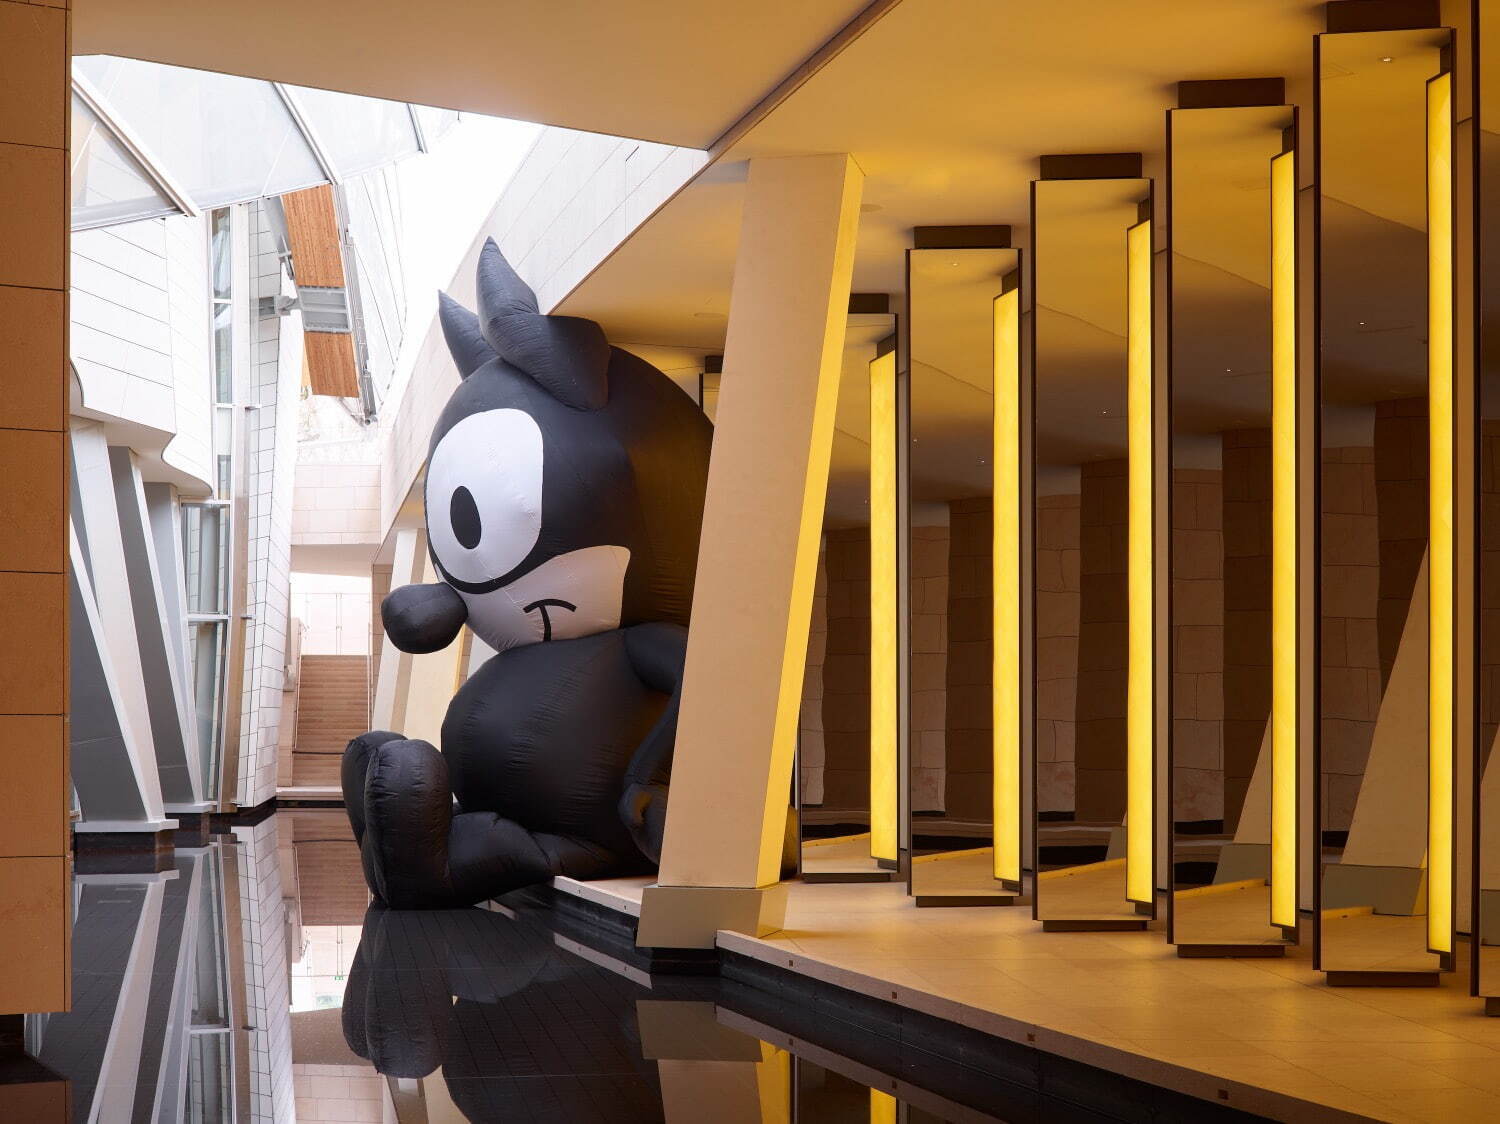 Mark Leckey, <i width="1500" height="1124">Felix the Cat,</i> 2013, Installation view at Fondation Louis Vuitton (2018)
© Mark Leckey. Photo credits: © Fondation Louis Vuitton / Marc Domage